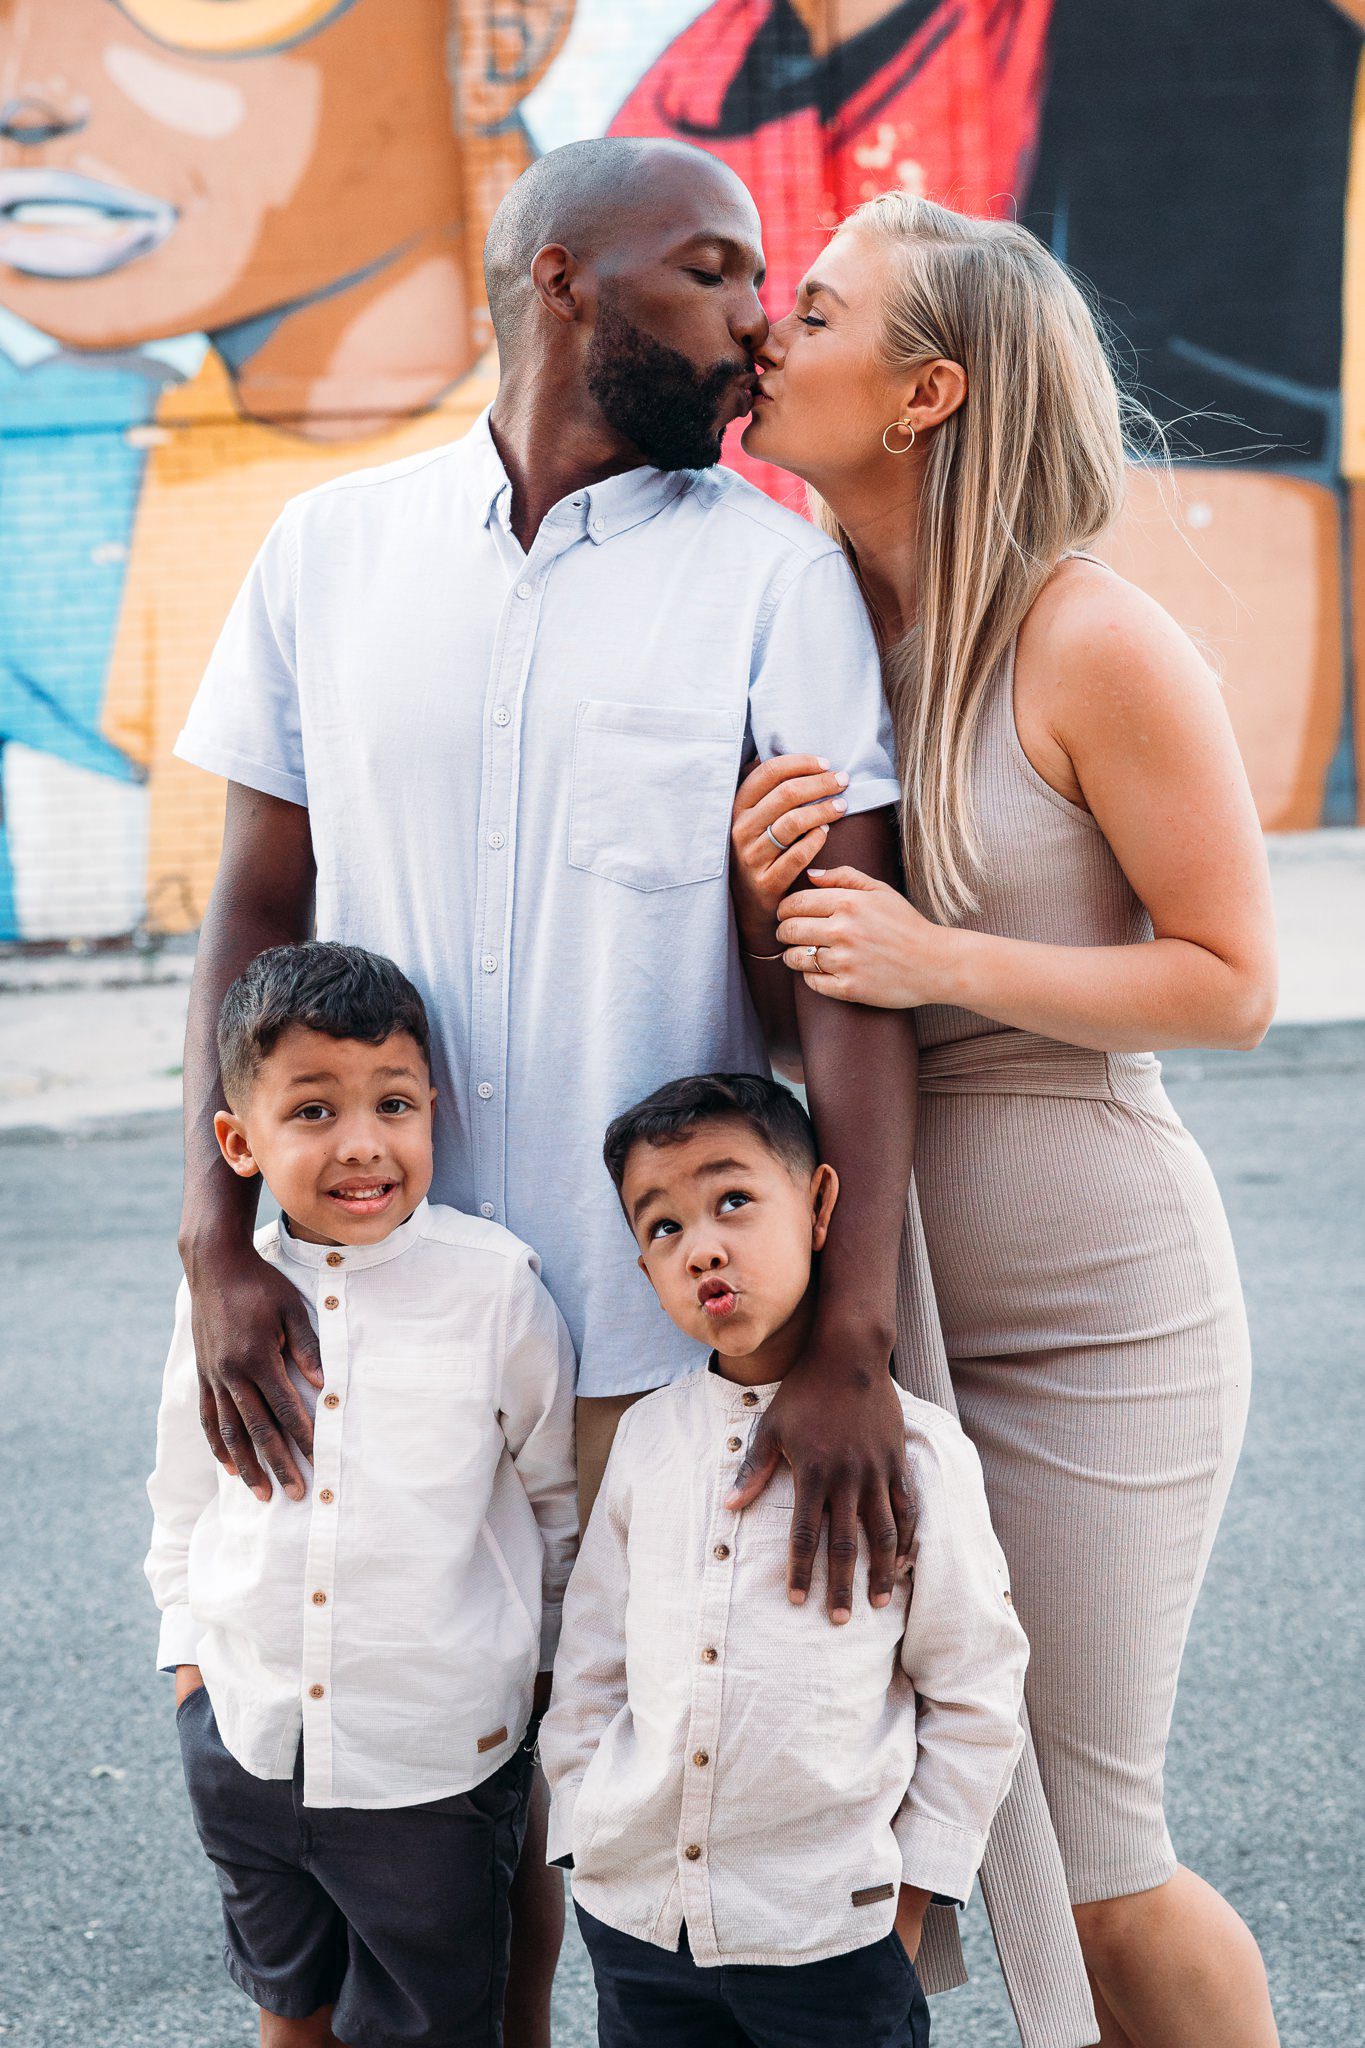 man and woman kissing, two kids making silly faces